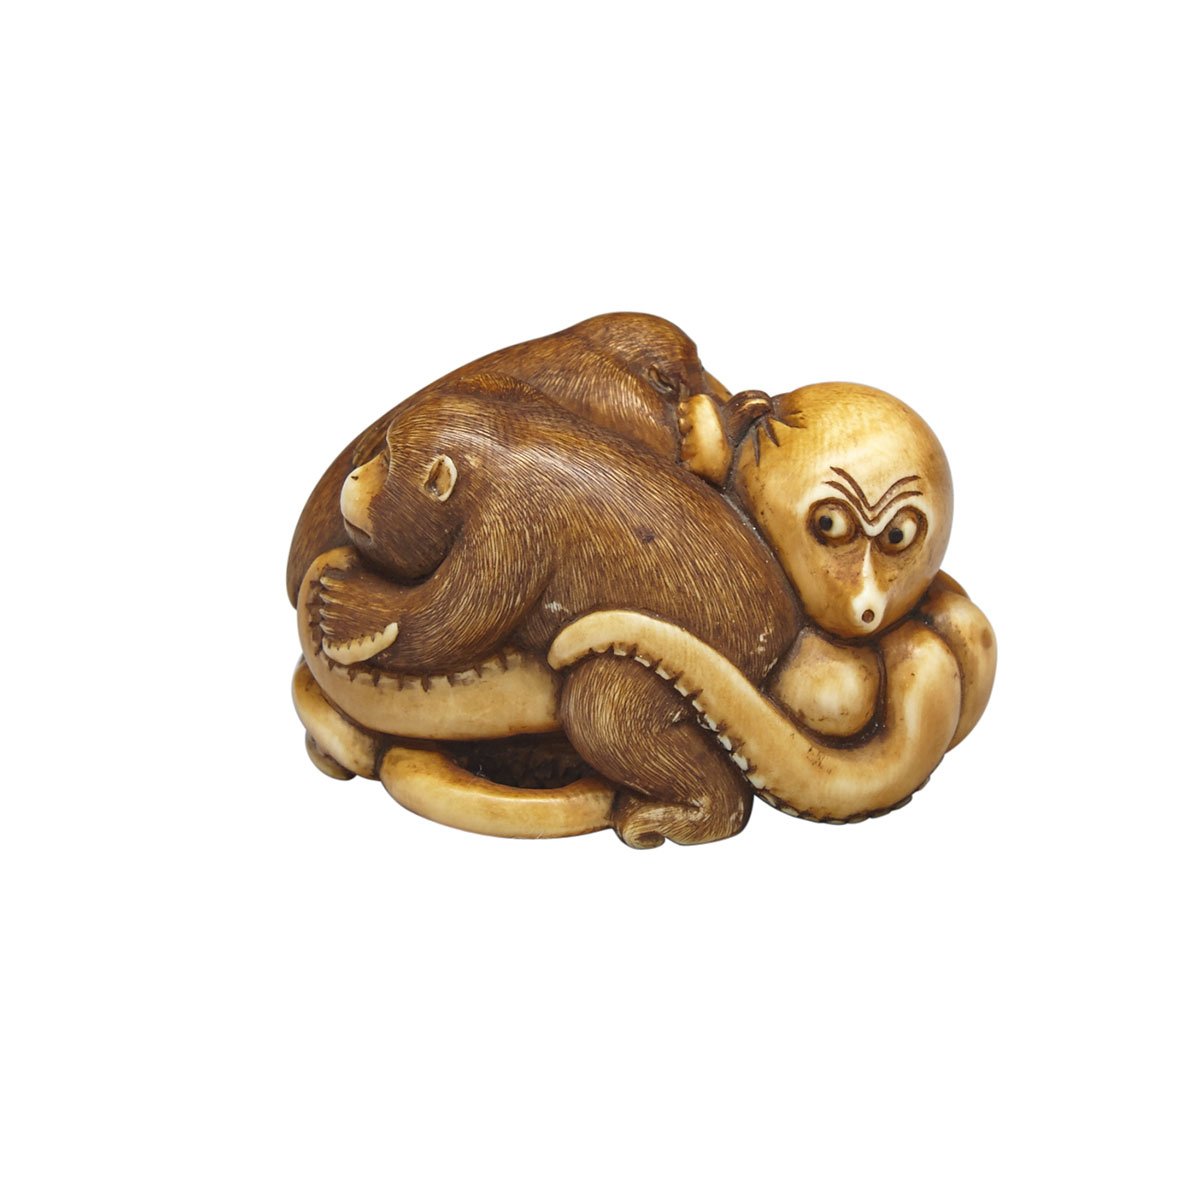 Ivory Netsuke of an Octopus and Two Monkeys, 19th Century